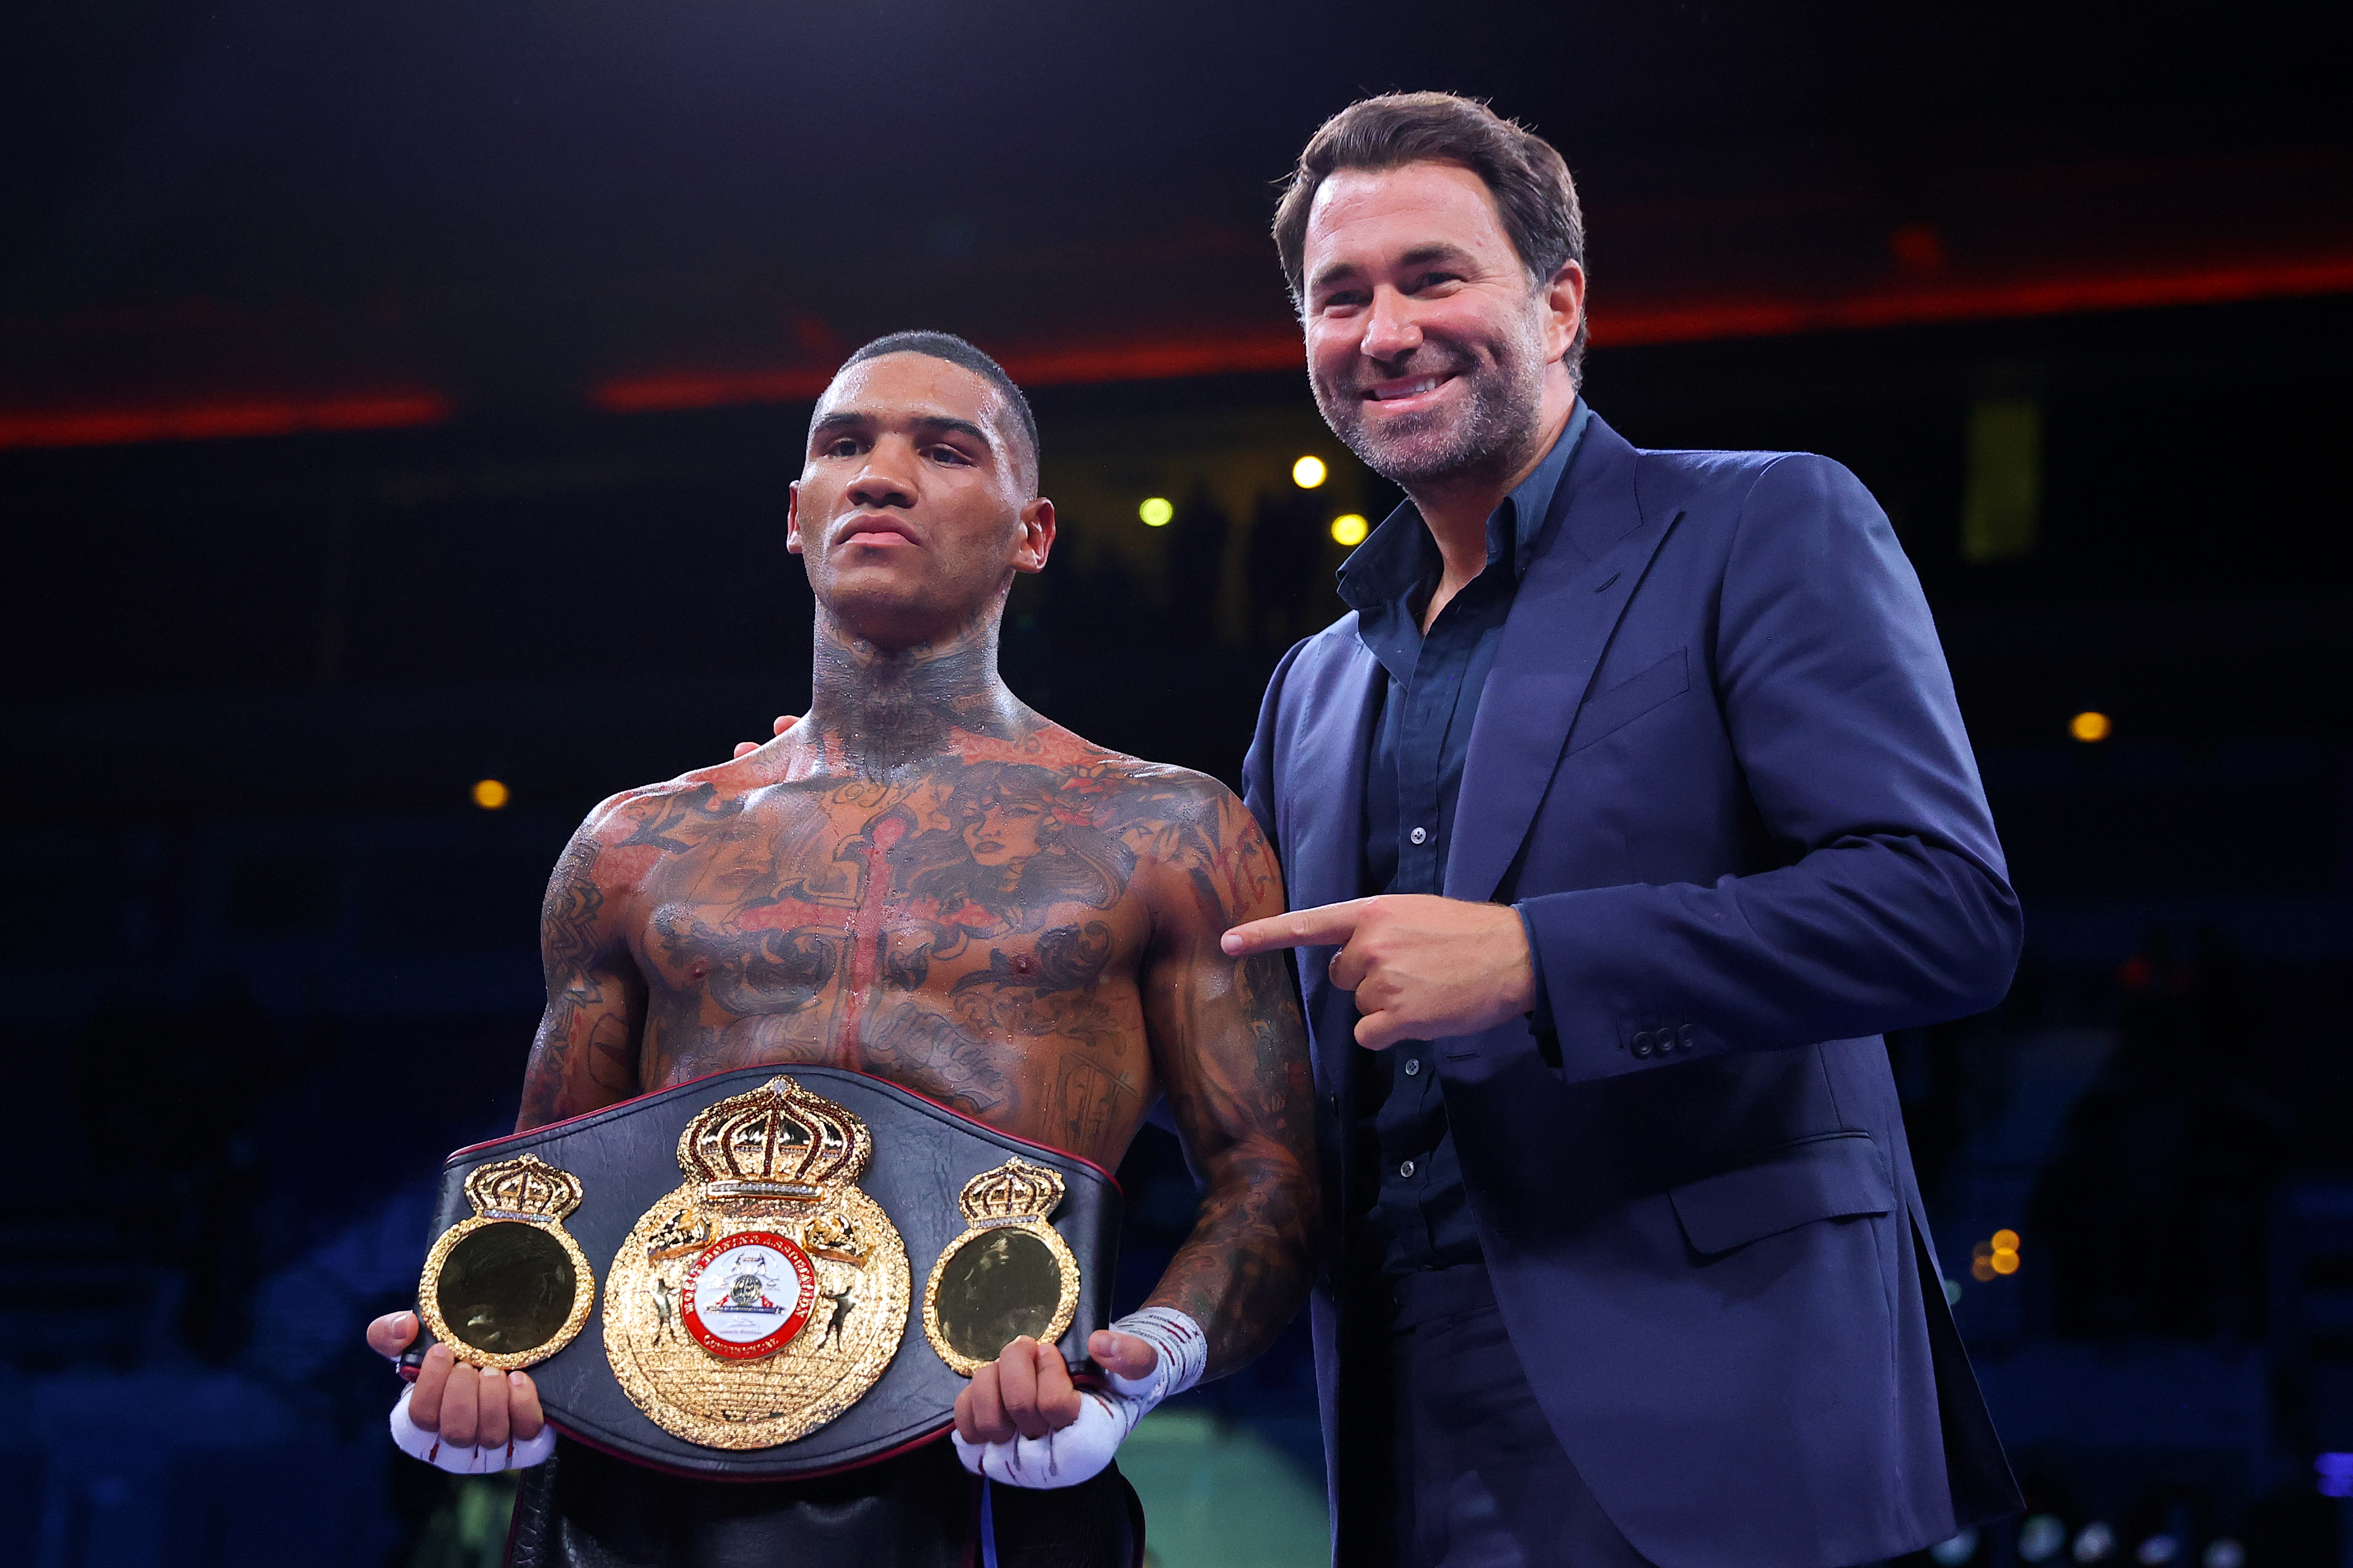 Eddie Hearn says Conor Benn wants to jump straight back into a big fight